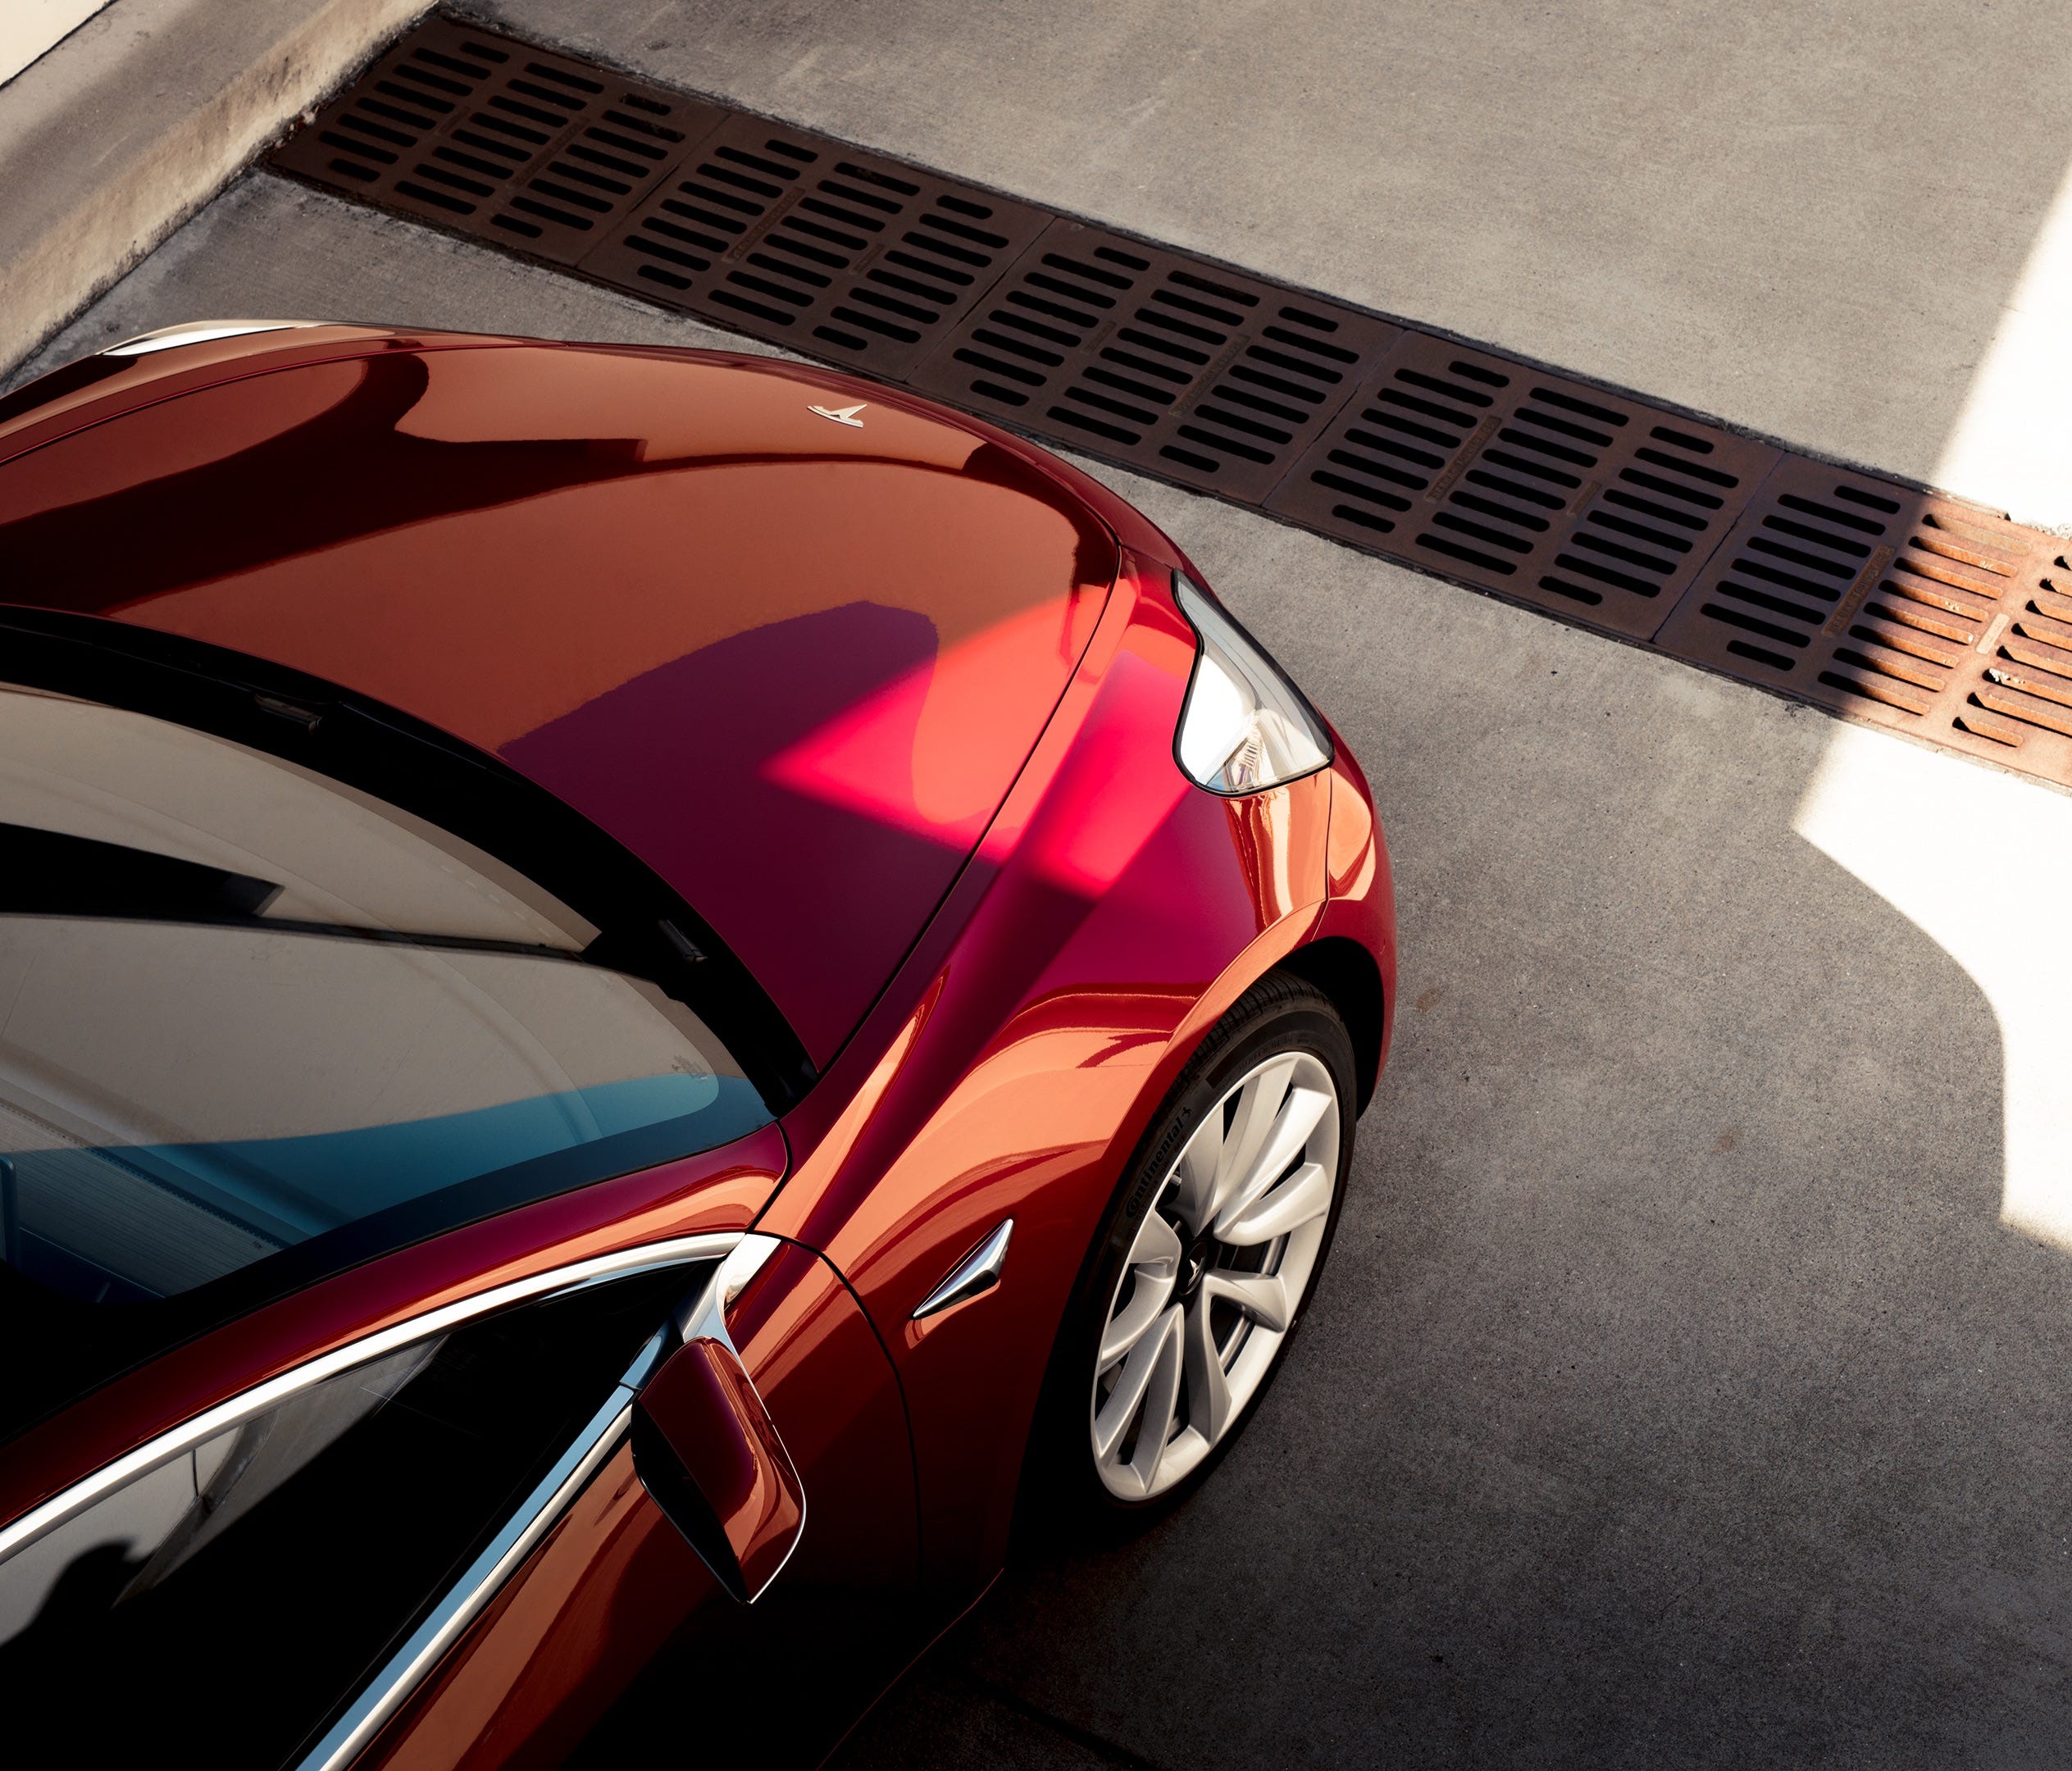 The Tesla Model 3 takes many of its stylistic cues from its larger sibling, the Model S sedan.